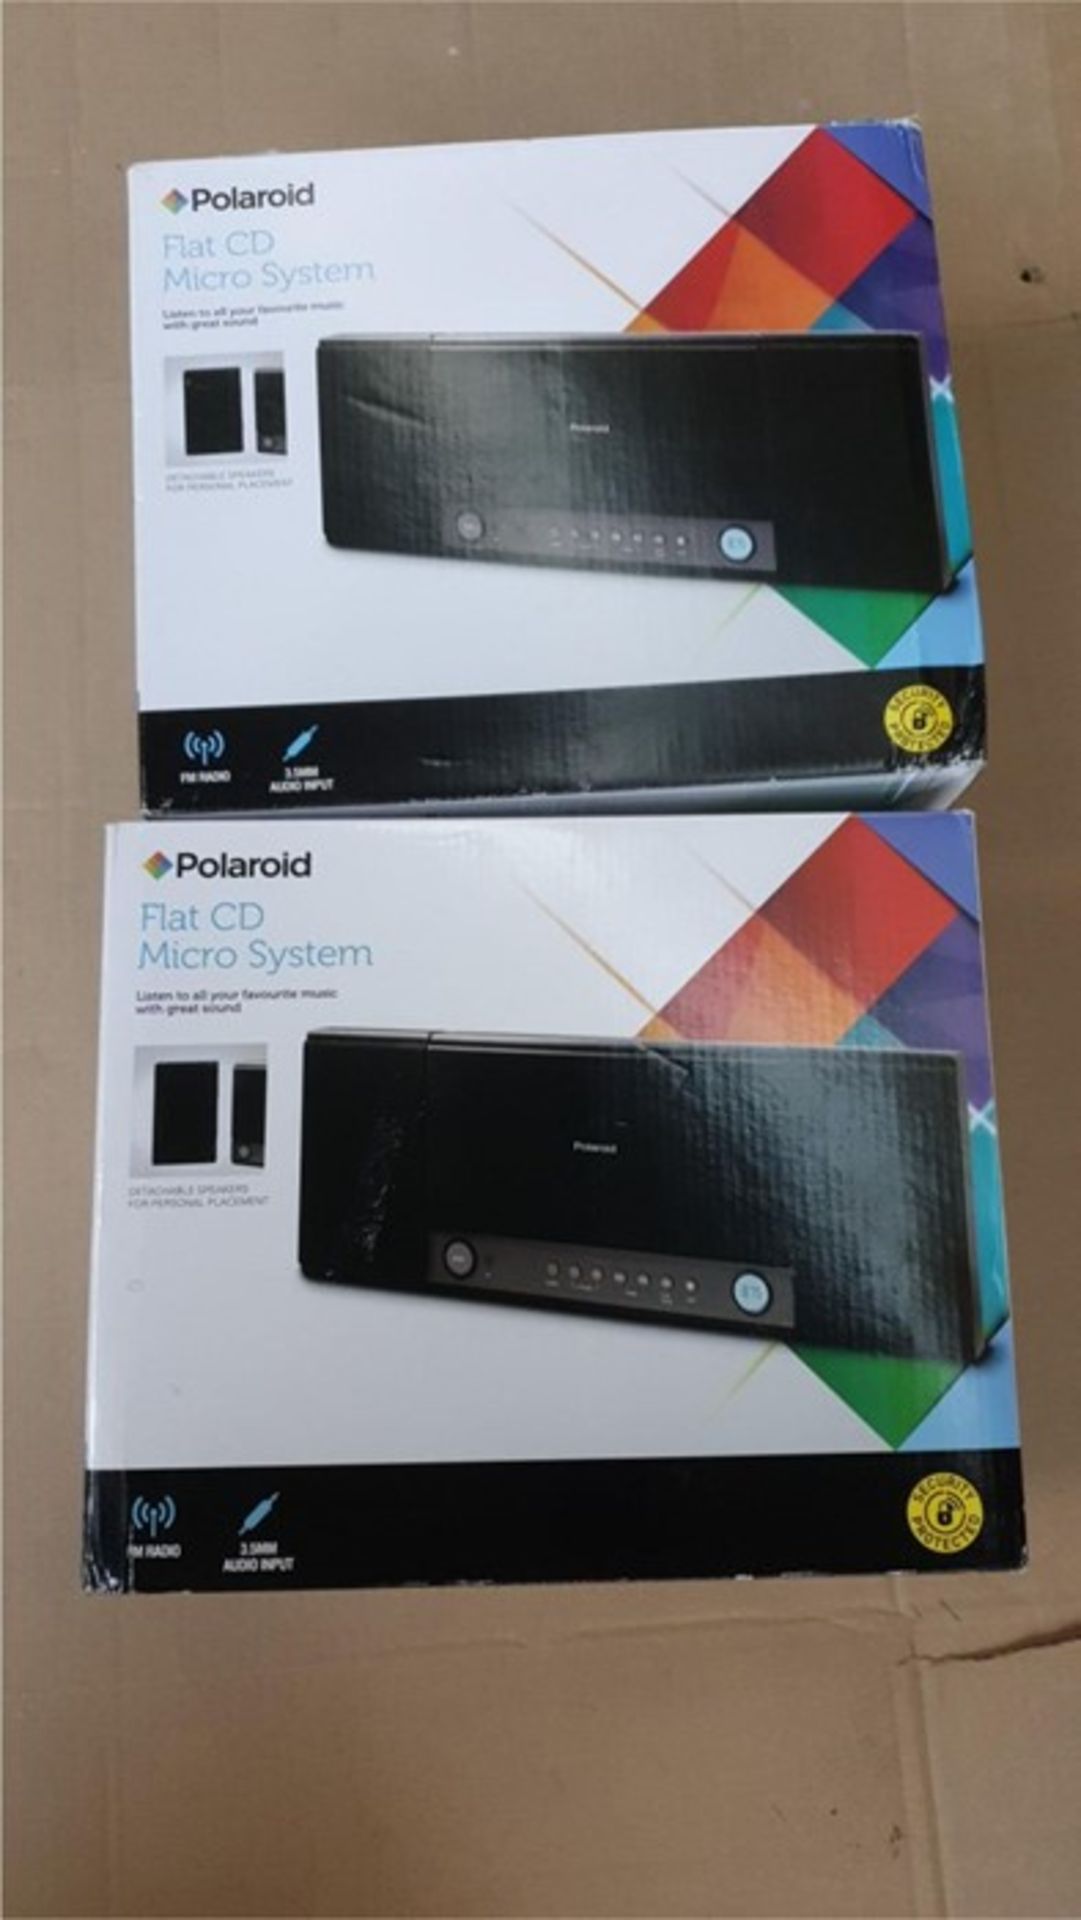 1 LOT TO CONTAIN 2 BOXED POLAROID FLAT CD MICRO SYSTEM IN BLACK / RRP £60.00 - BL -4578 (VIEWING